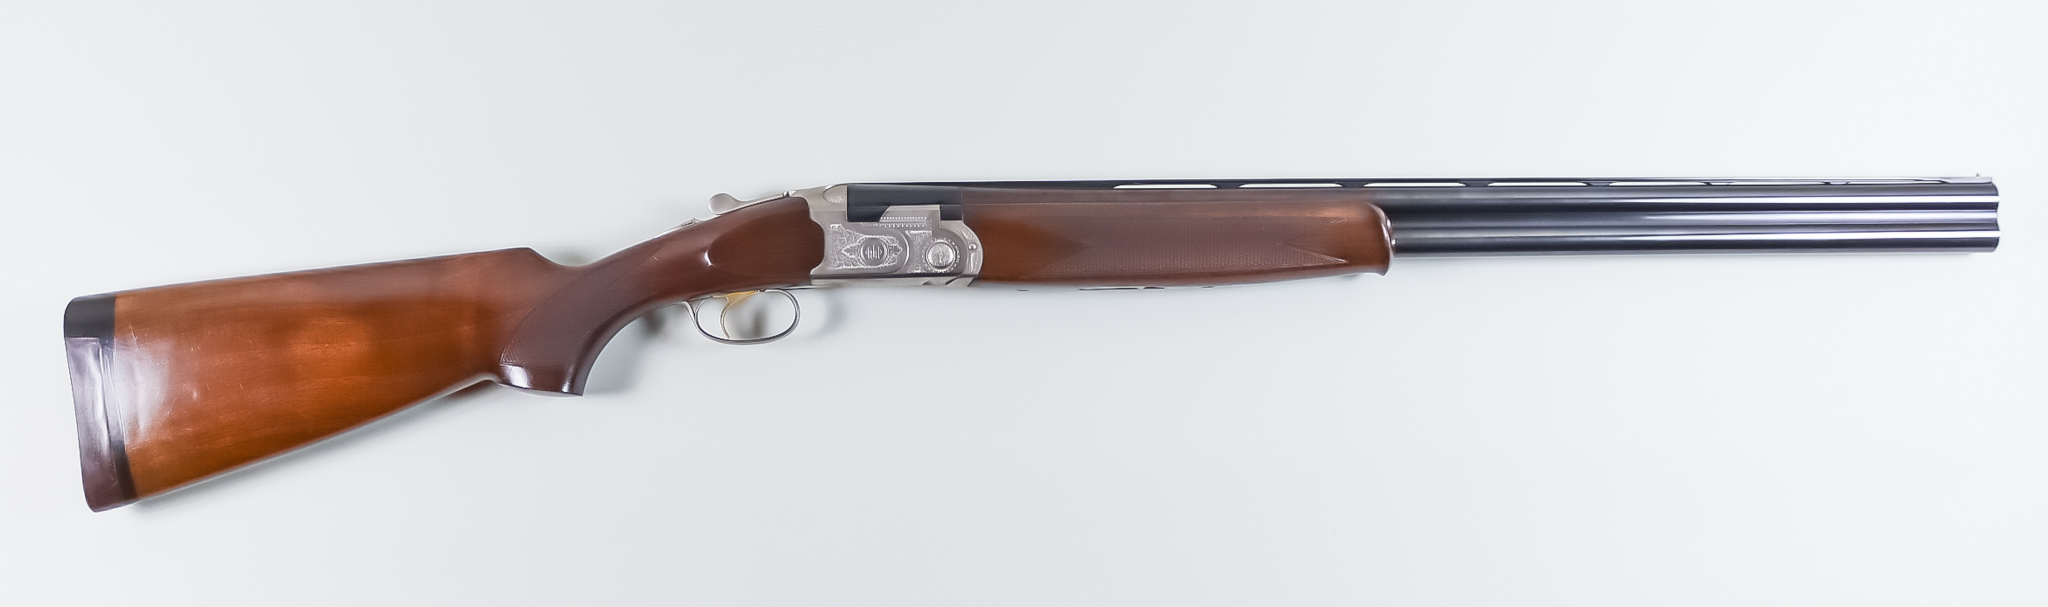 A 12 Bore Over and Under Shotgun by Berretta, Serial No. 86821, Model "Silver Pigeon", the 28ins